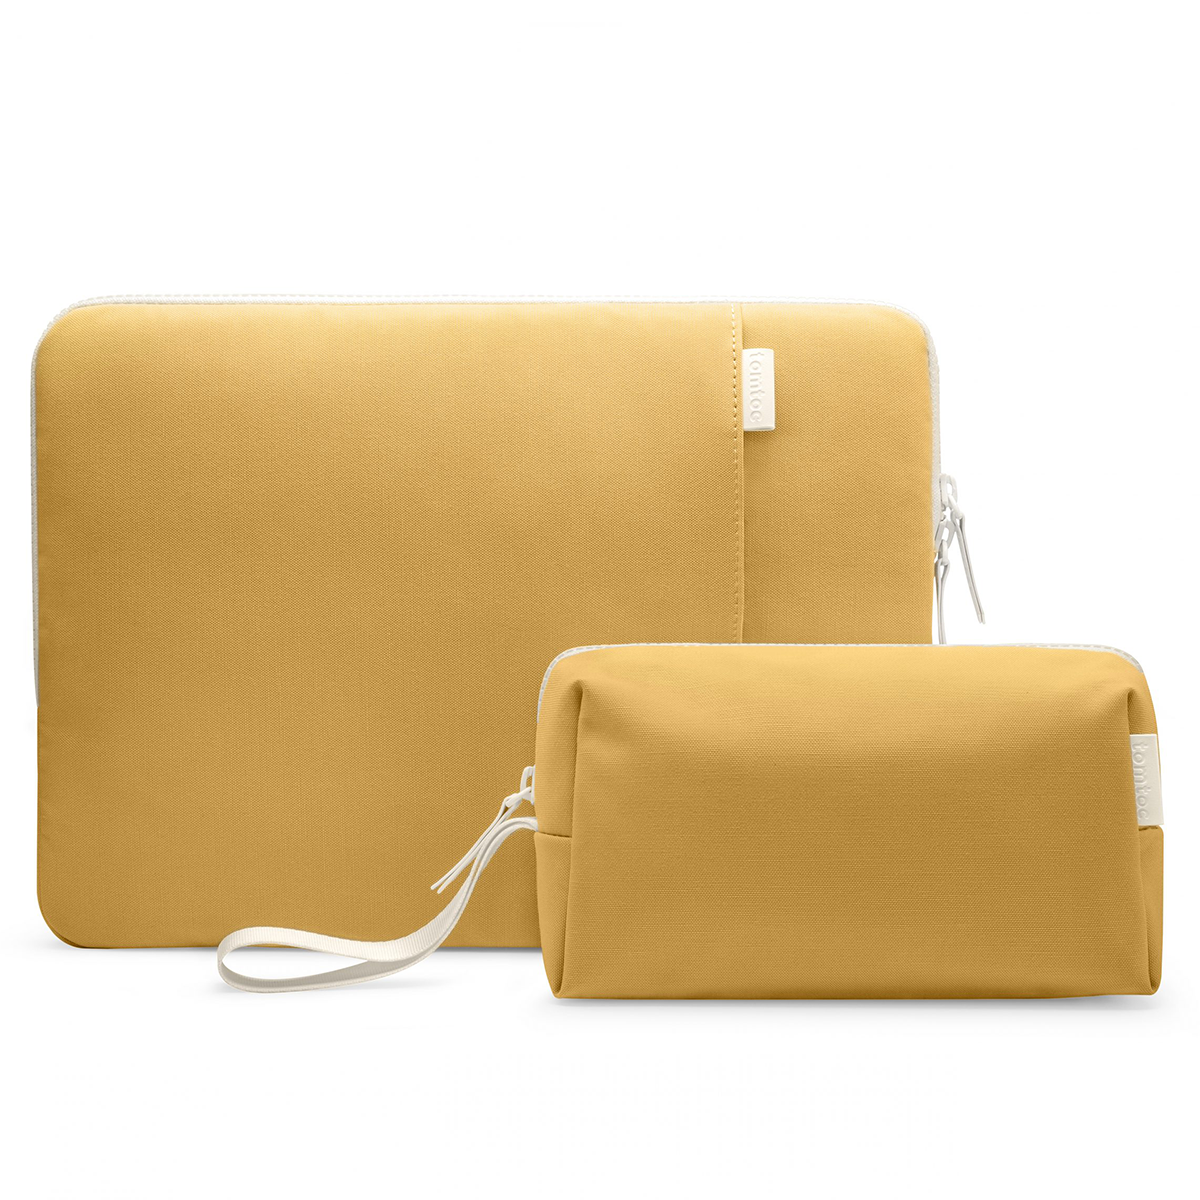  TÚI CHỐNG SỐC TOMTOC (USA) ORGANIZED CORNER ARMOR + POUCH MACBOOK AIR/PRO 13” NEW YELLOW A27-C02Y01 